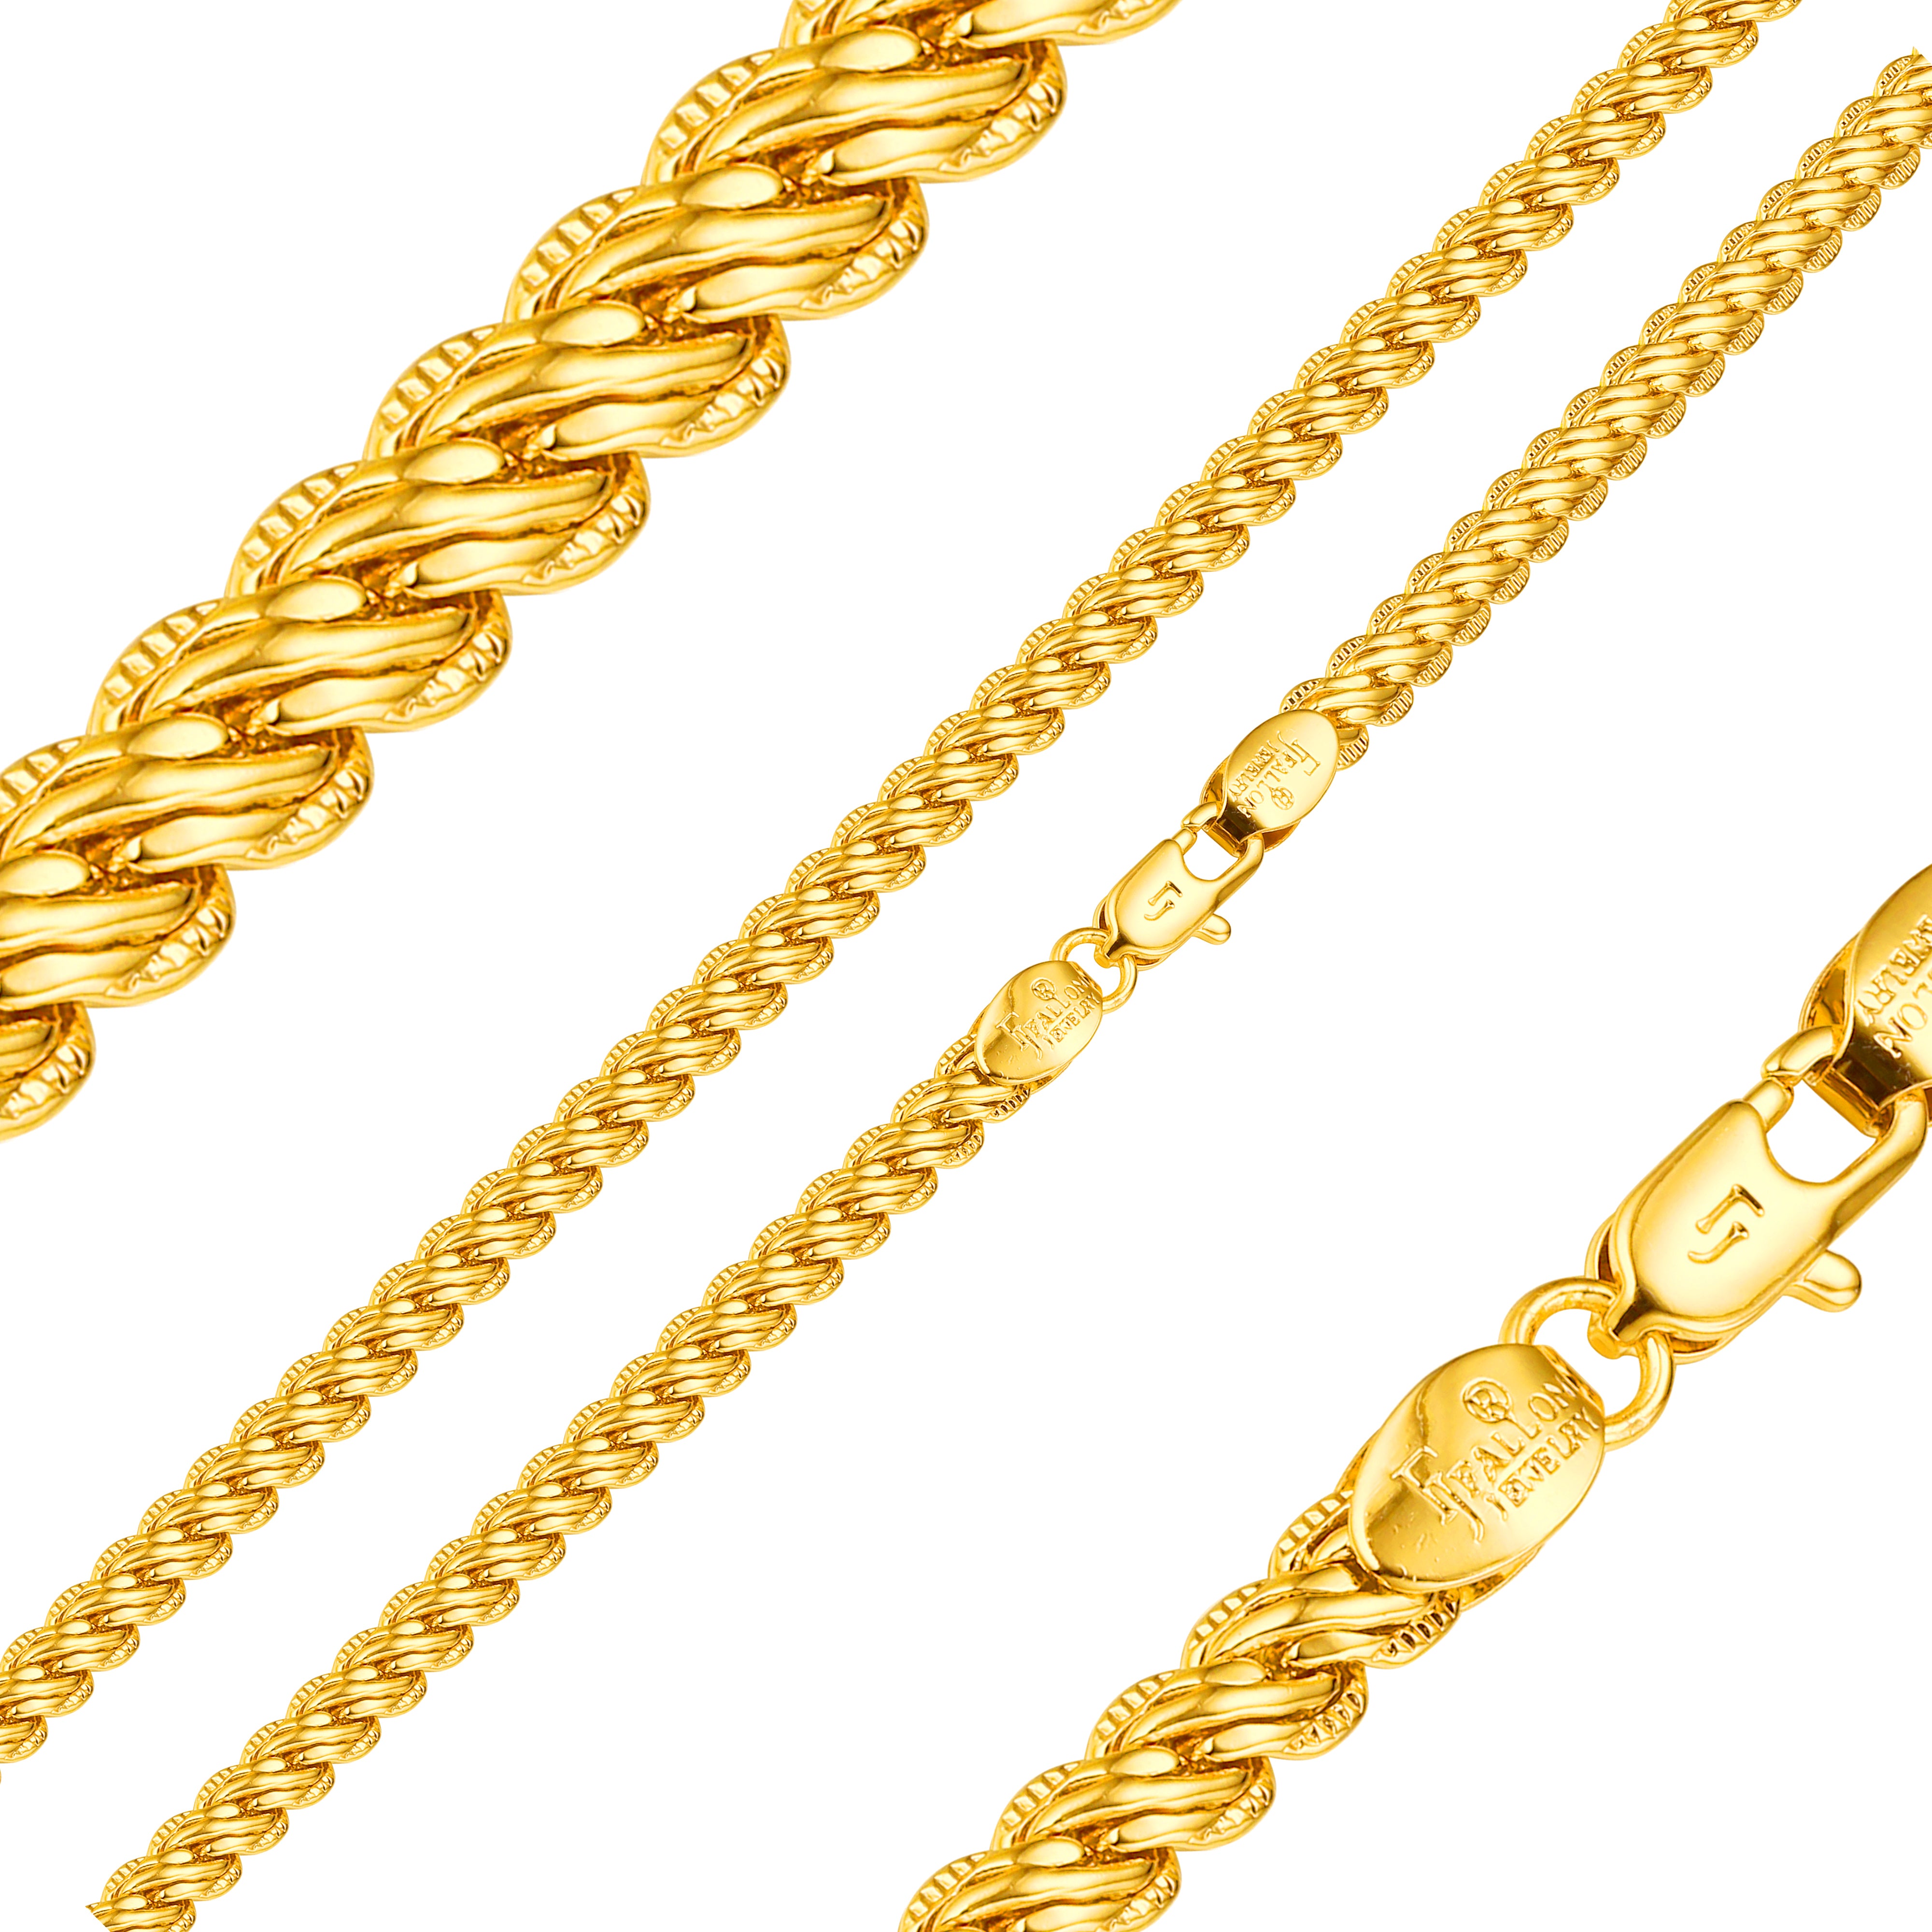 Fancy link Spiga wheat compact chains plated in 14K Gold